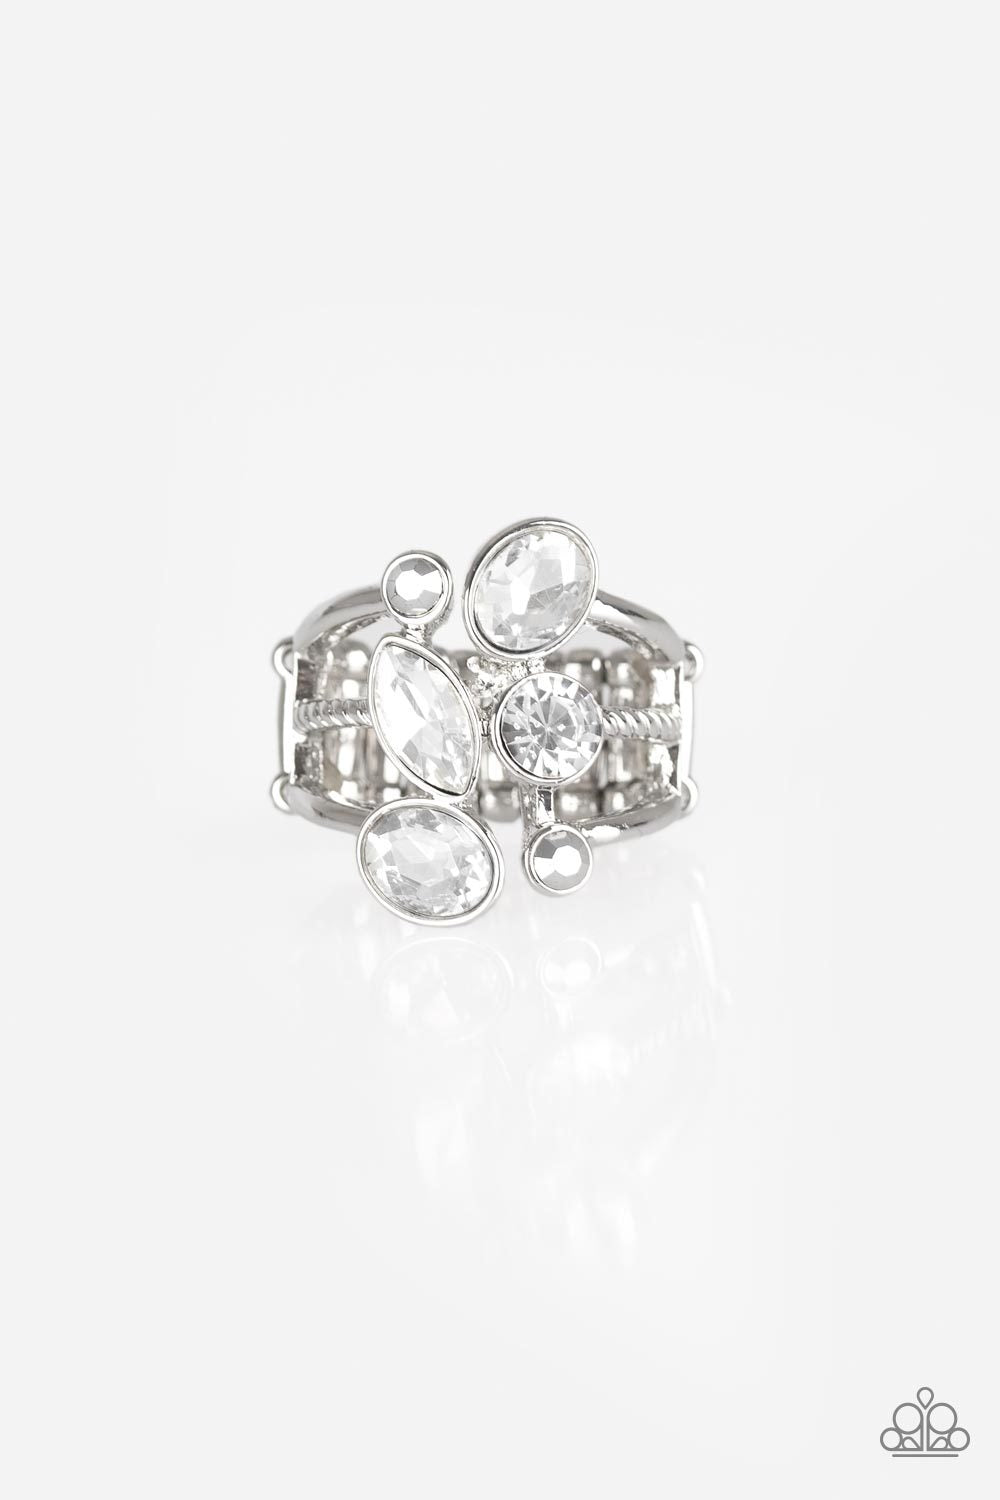 Metro Mingle Silver and White Gem Ring - Paparazzi Accessories-CarasShop.com - $5 Jewelry by Cara Jewels